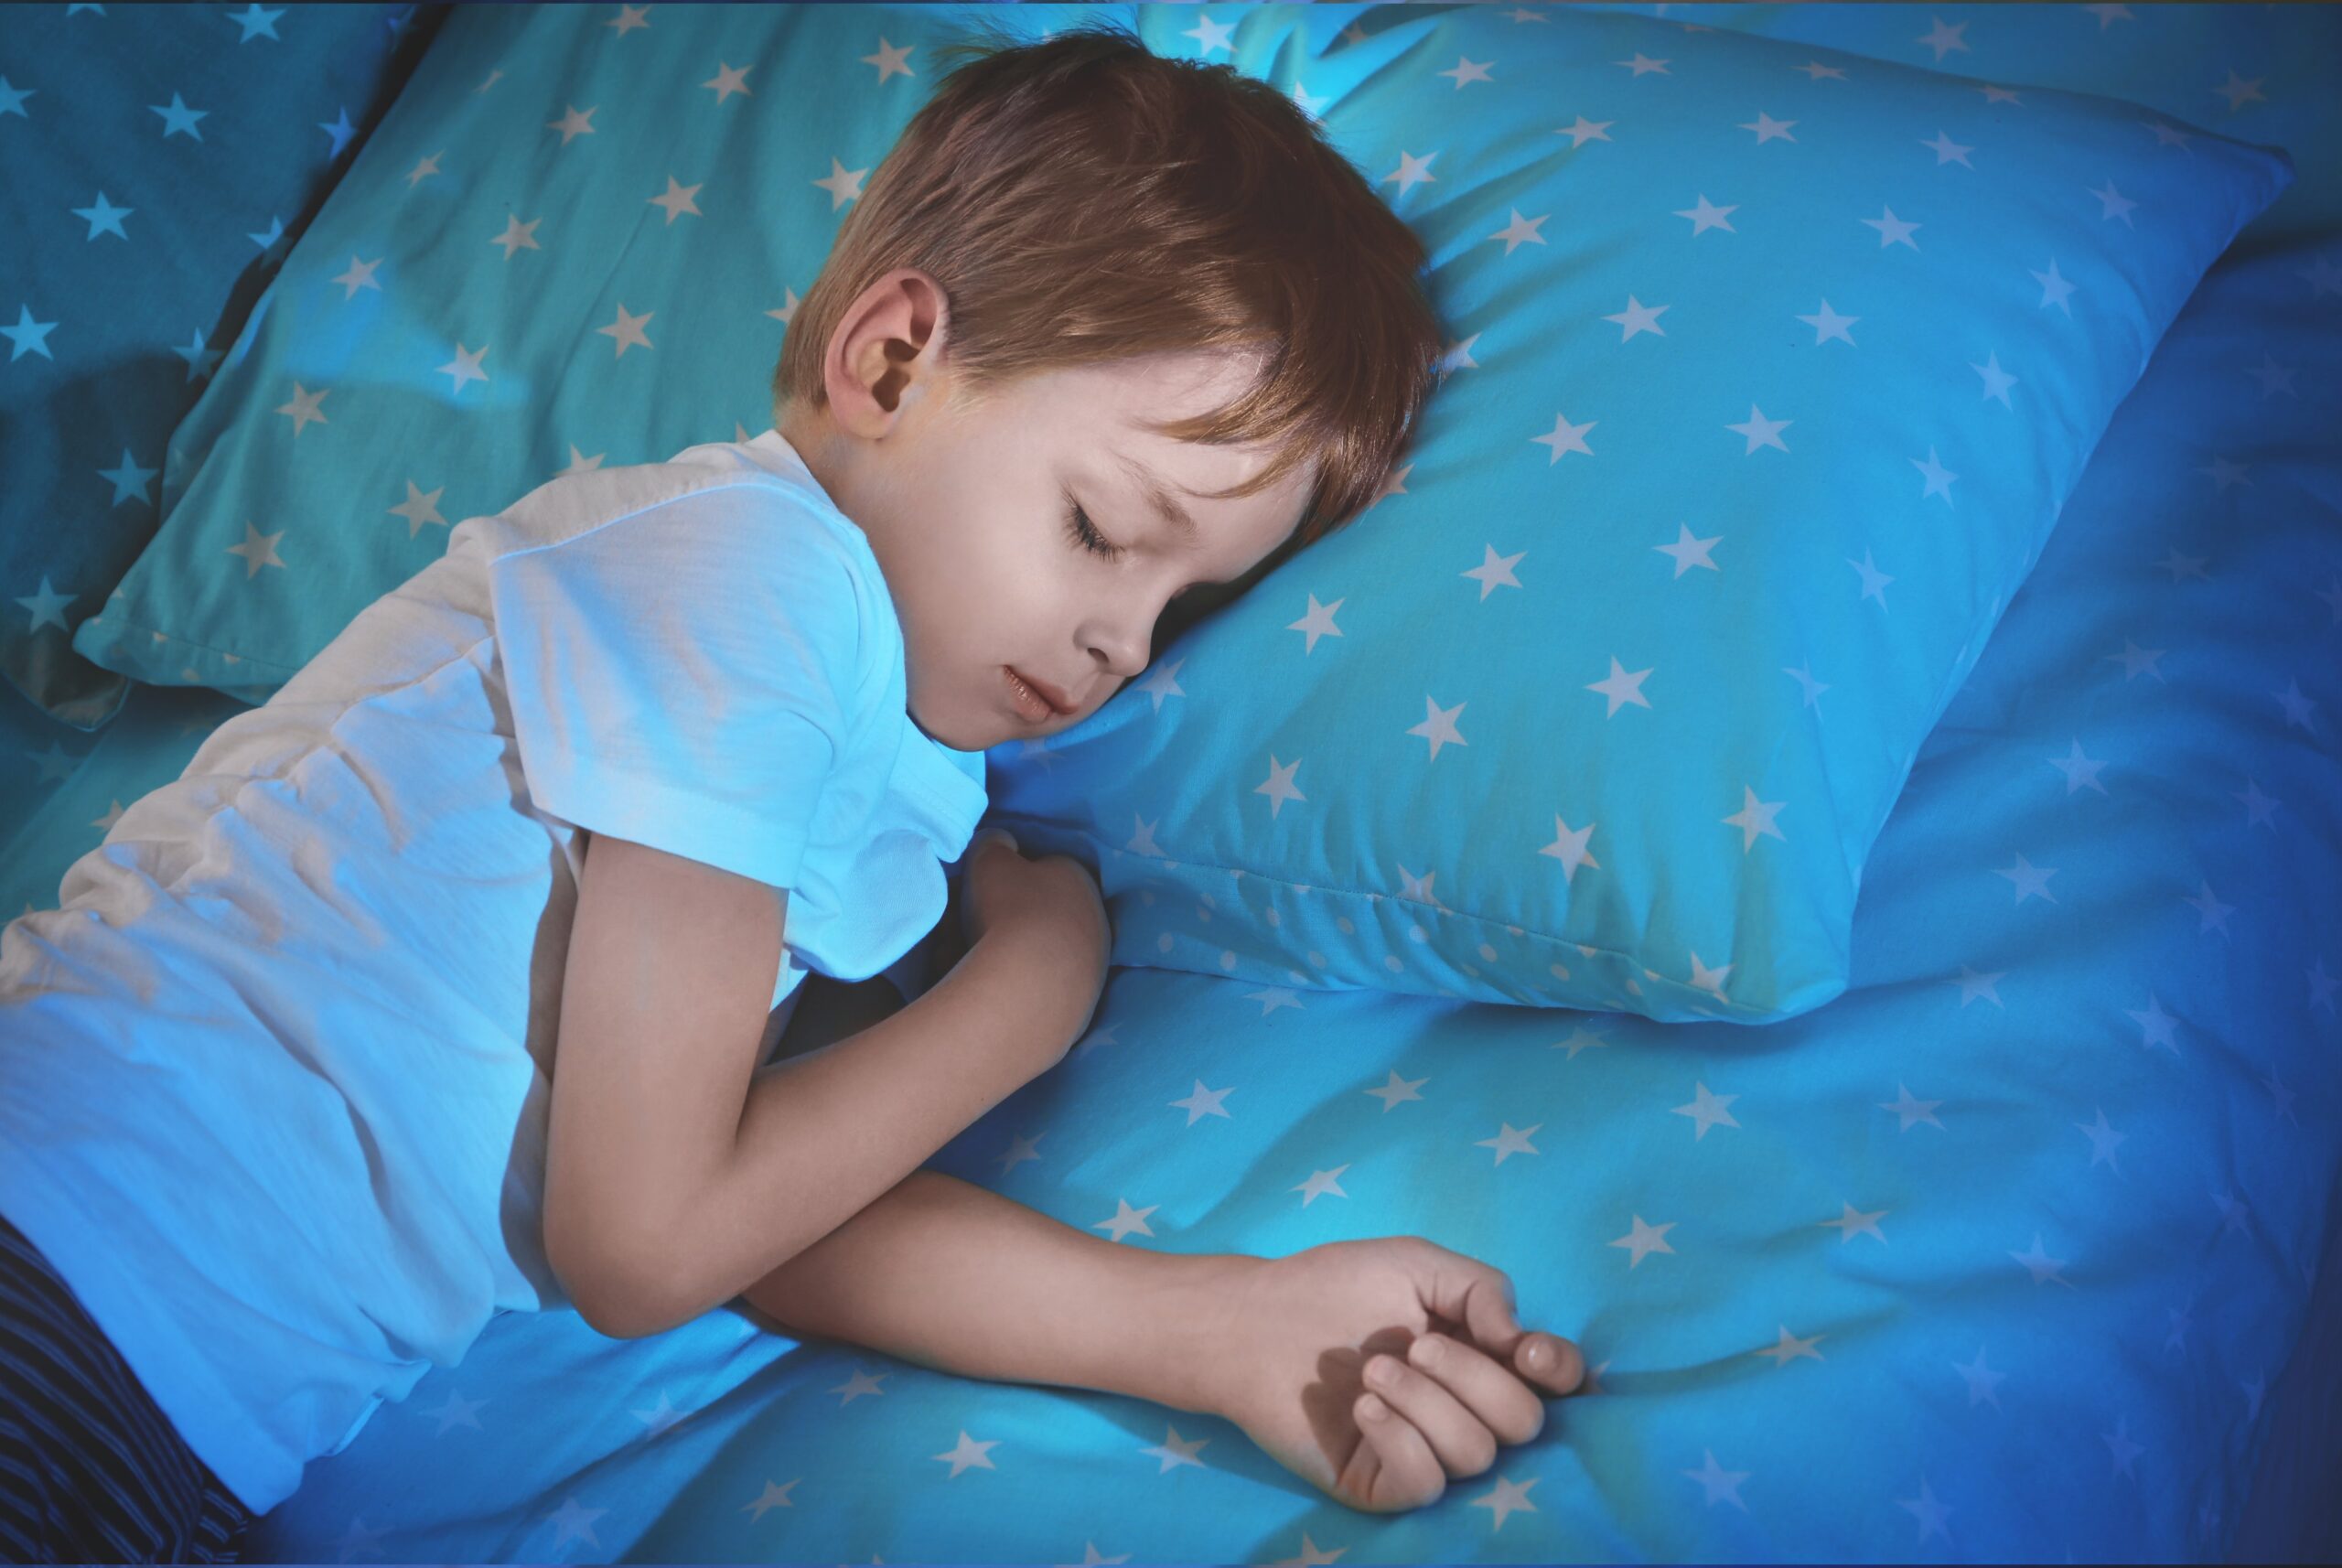 How to Promote Good Sleep Hygiene in Children With Sleep Problems?